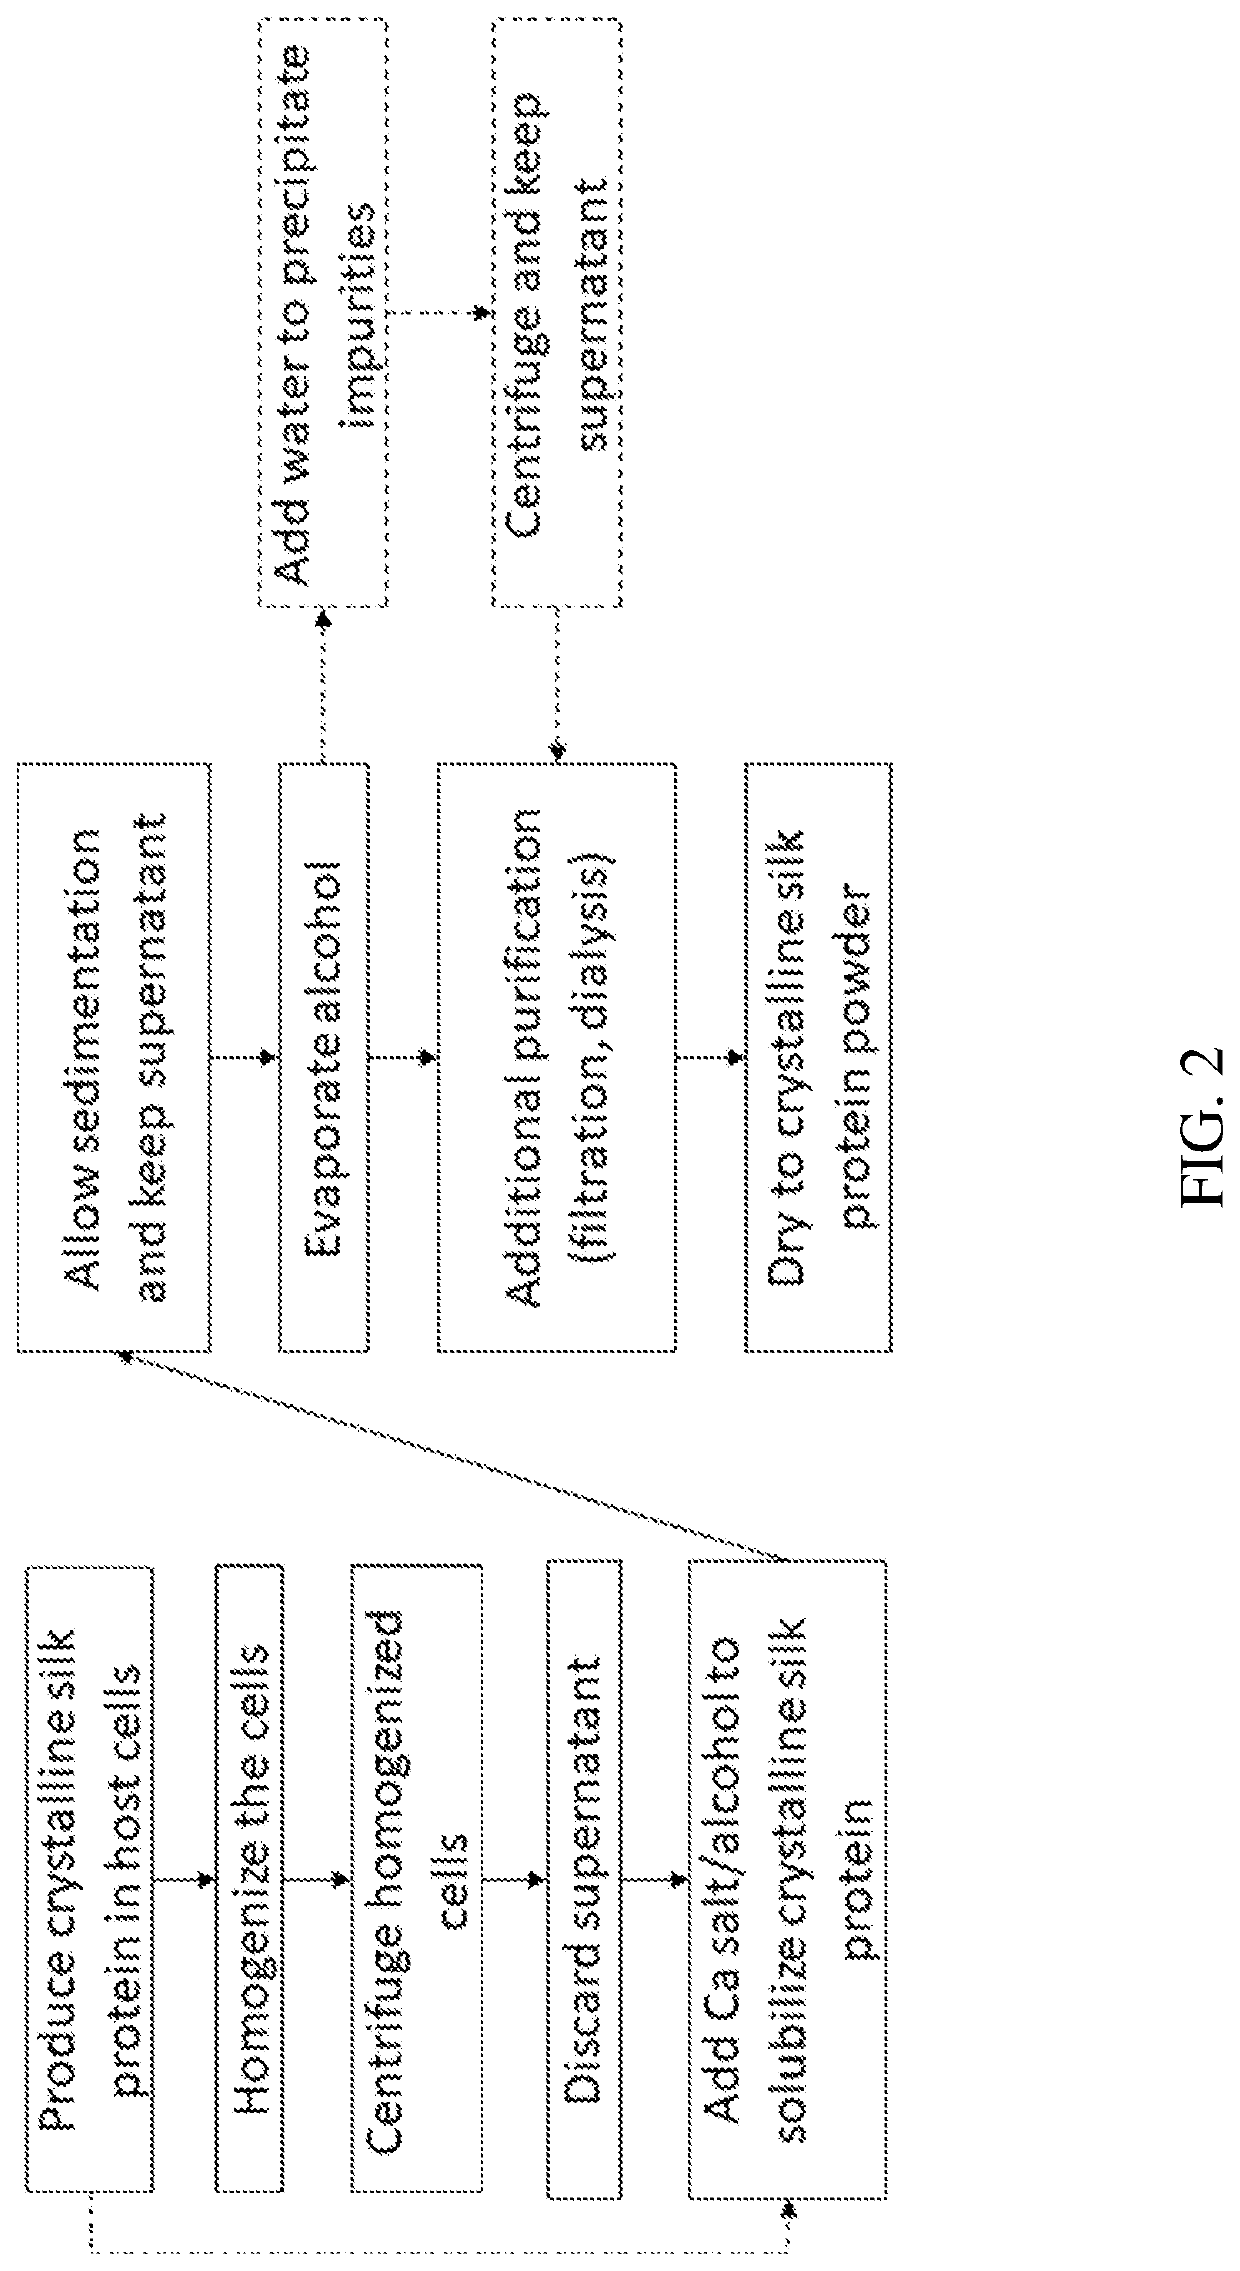 Methods for improved extraction of spider silk proteins